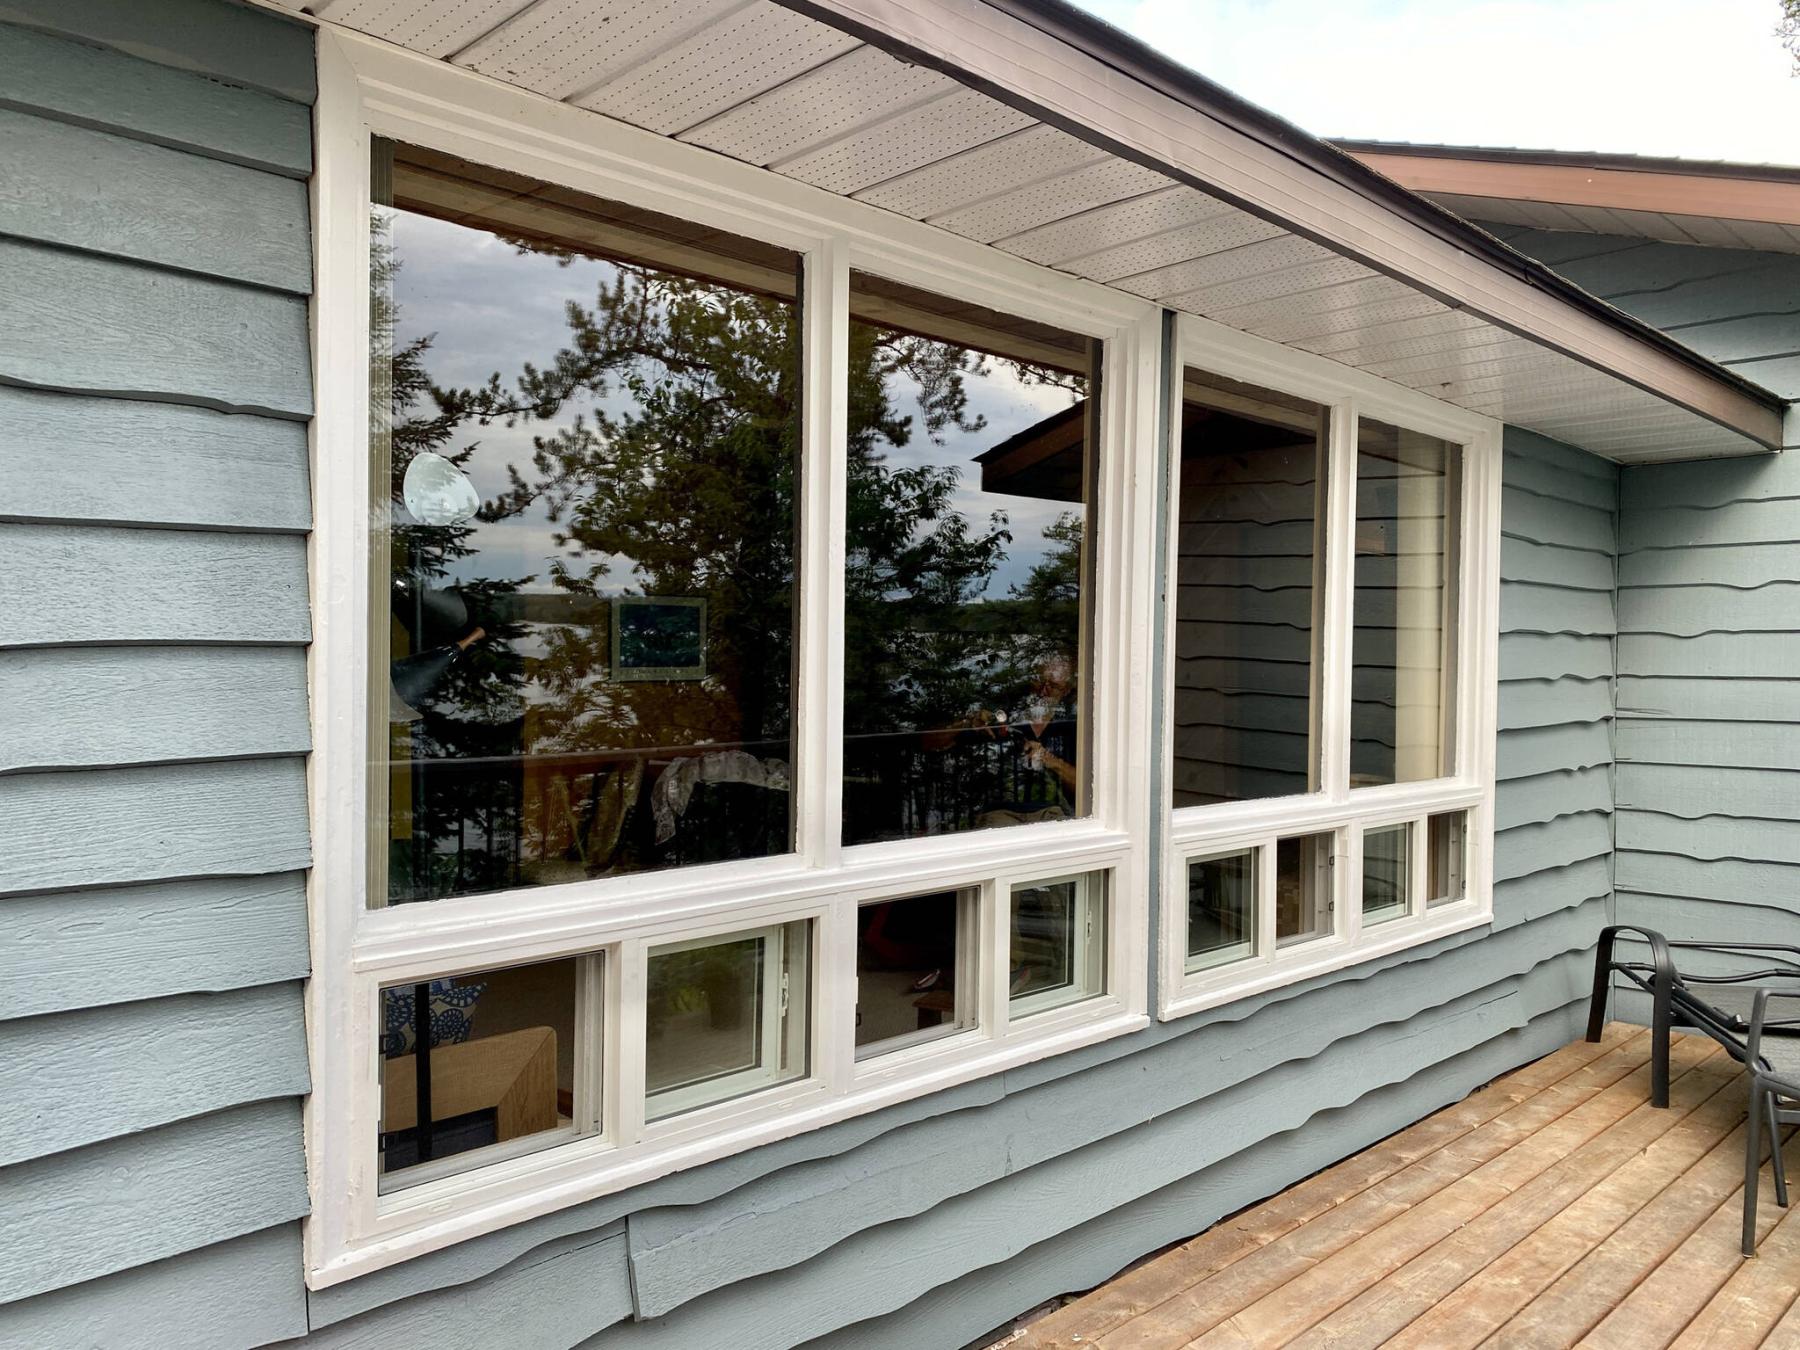  <p>Photos by Marc LaBossiere / Winnipeg Free Press</p>
                                <p>The old and inconvenient panes of glass within channels of wood along the bottom were removed to make way for new PVC sliders, fully adorned inside and out to match existing trim.</p> 